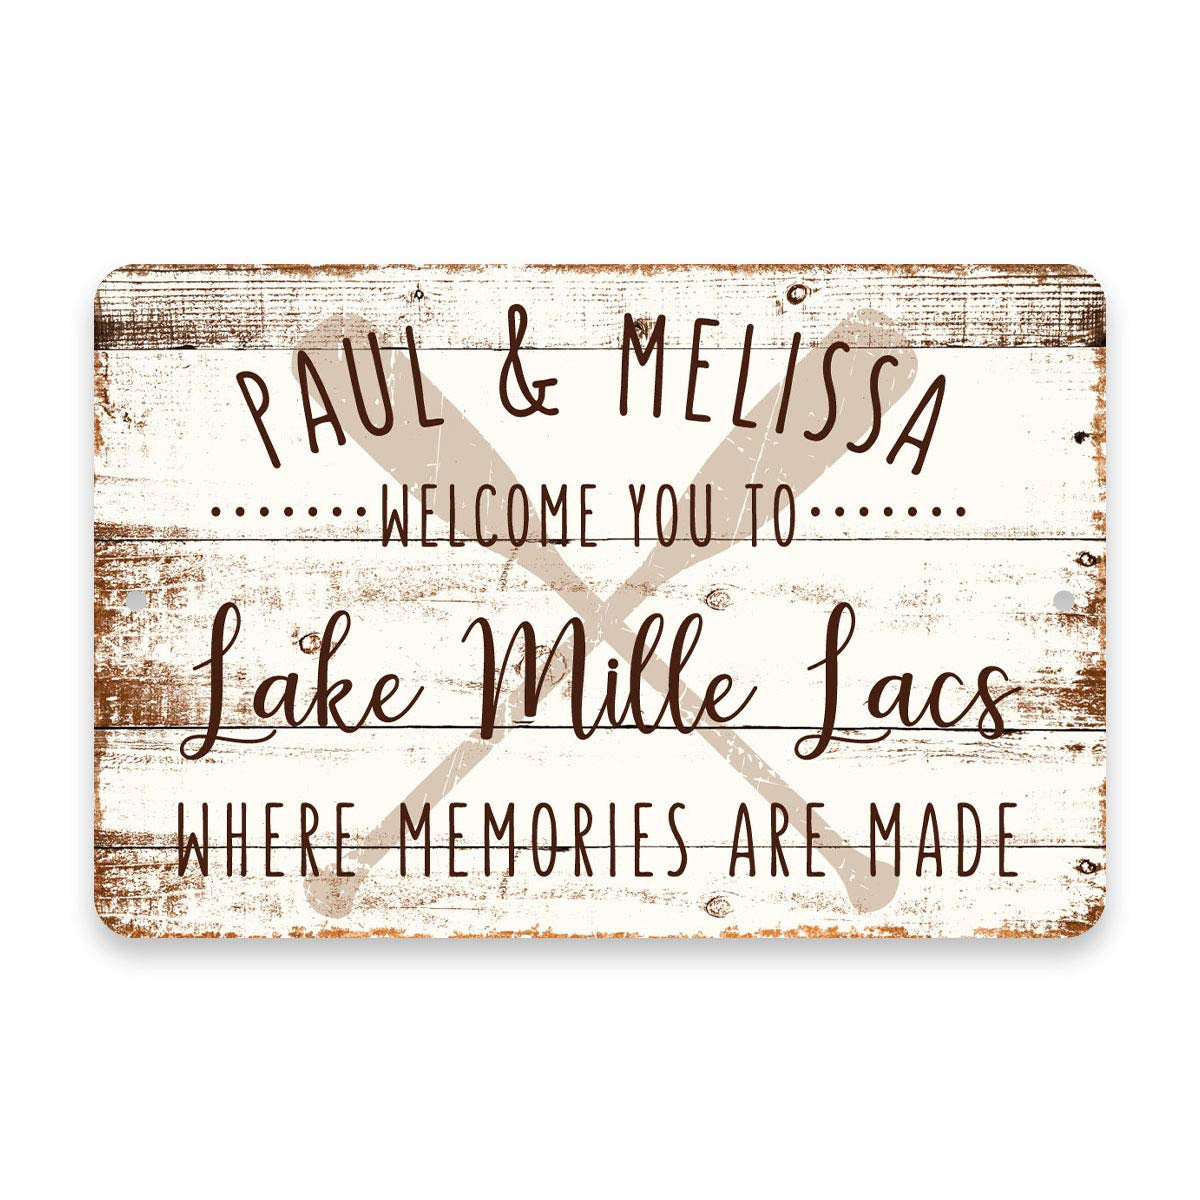 Personalized Welcome to Lake Mille Lacs Where Memories are Made Sign - 8 X 12 Metal Sign with Wood Look